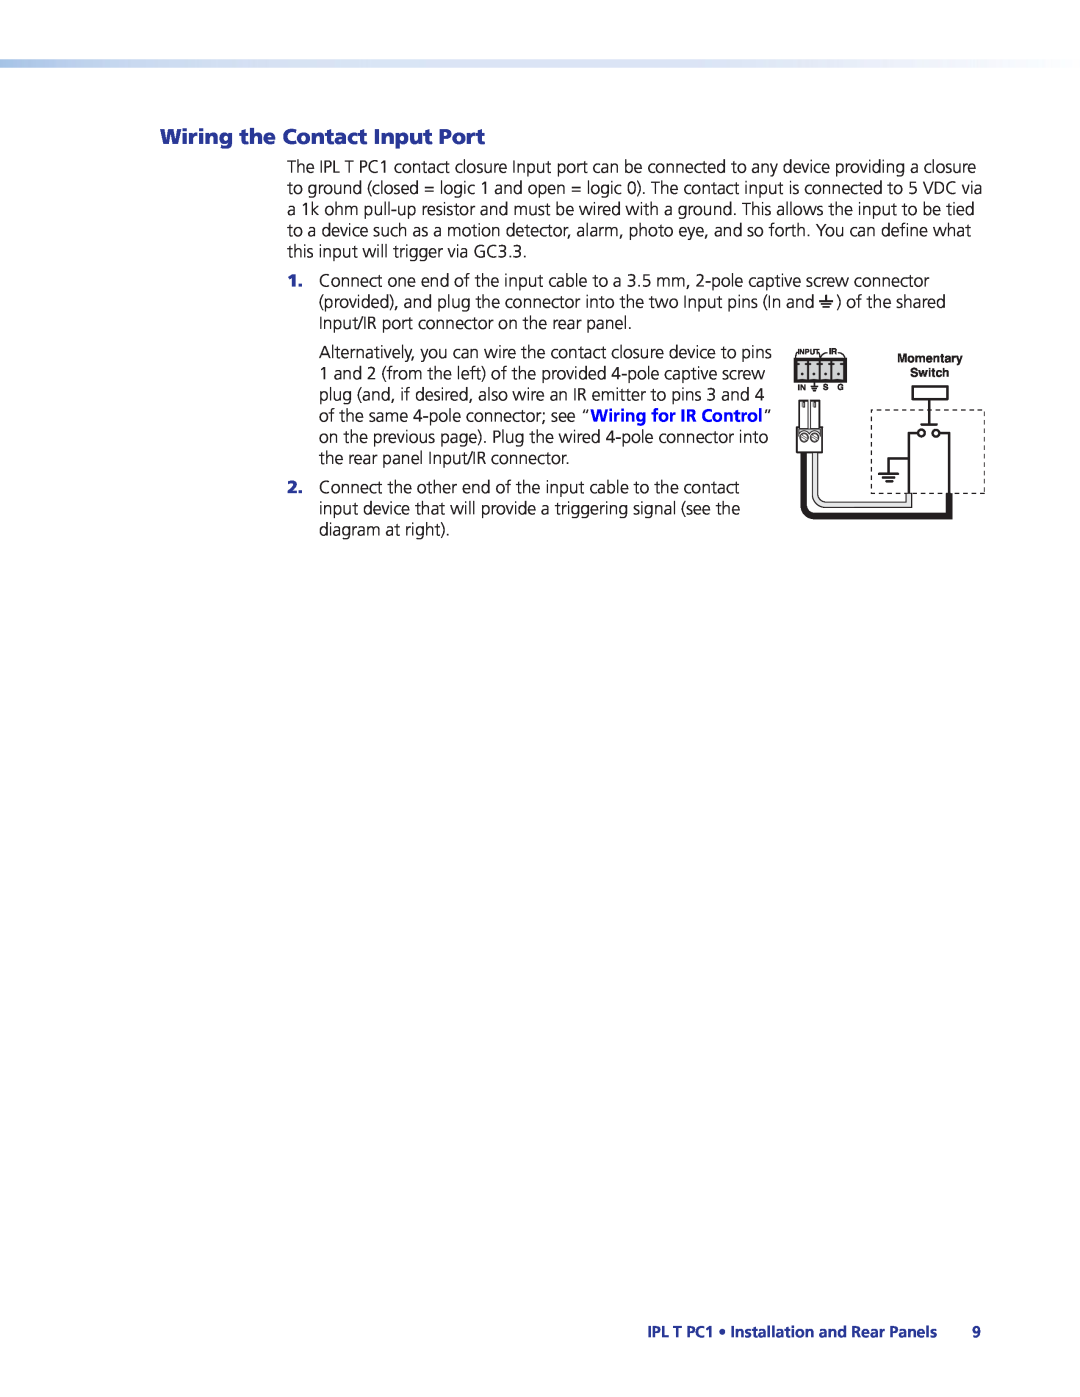 Extron electronic IPL T PC1i manual Wiring the Contact Input Port, Momentary Switch 